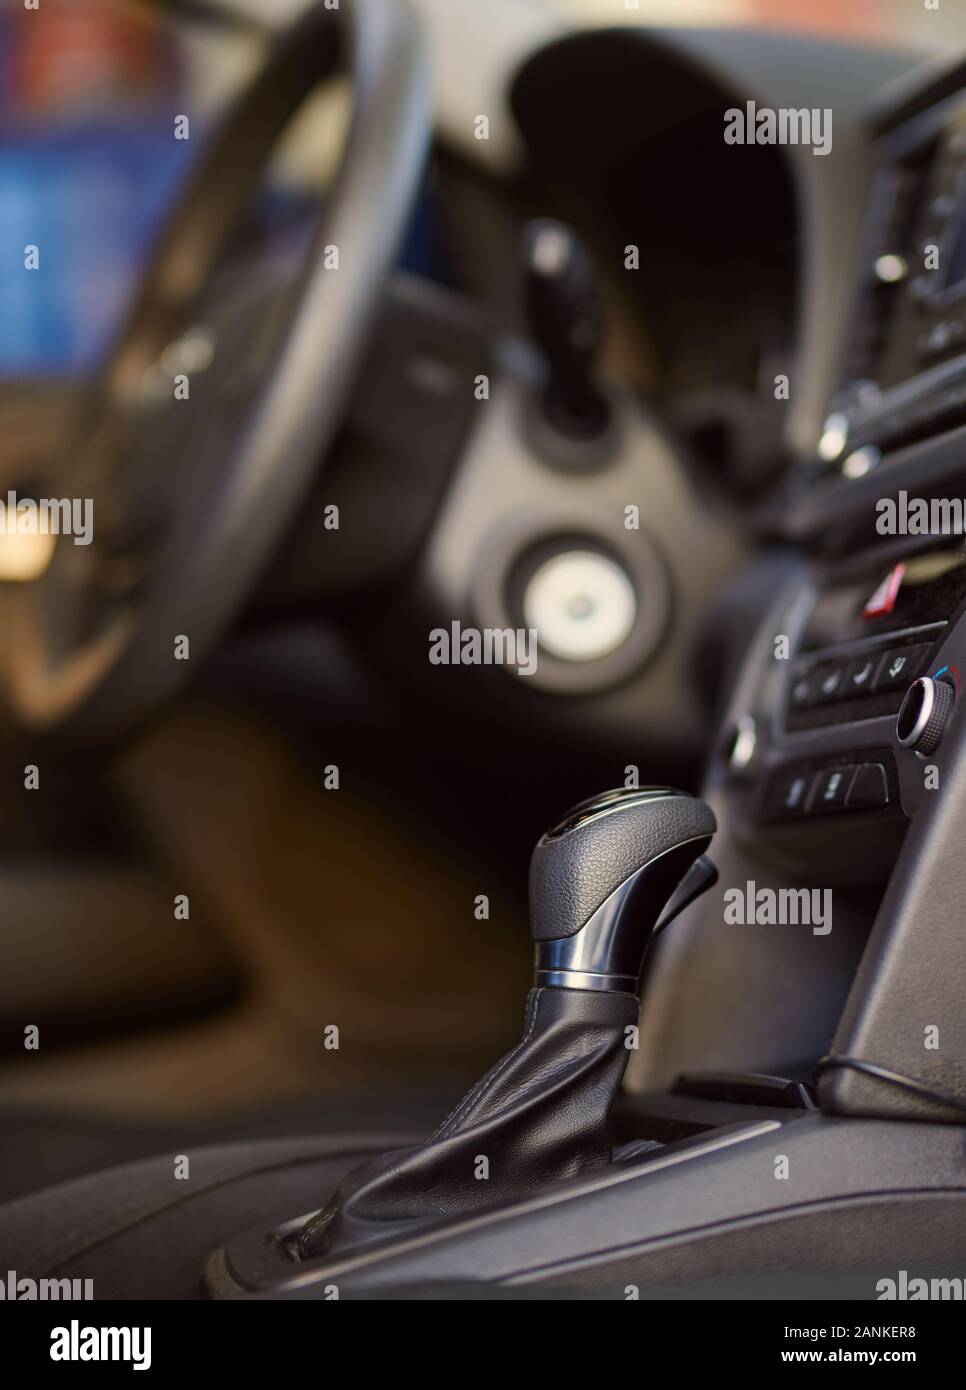 Modern automatic car gearbox close up view Stock Photo